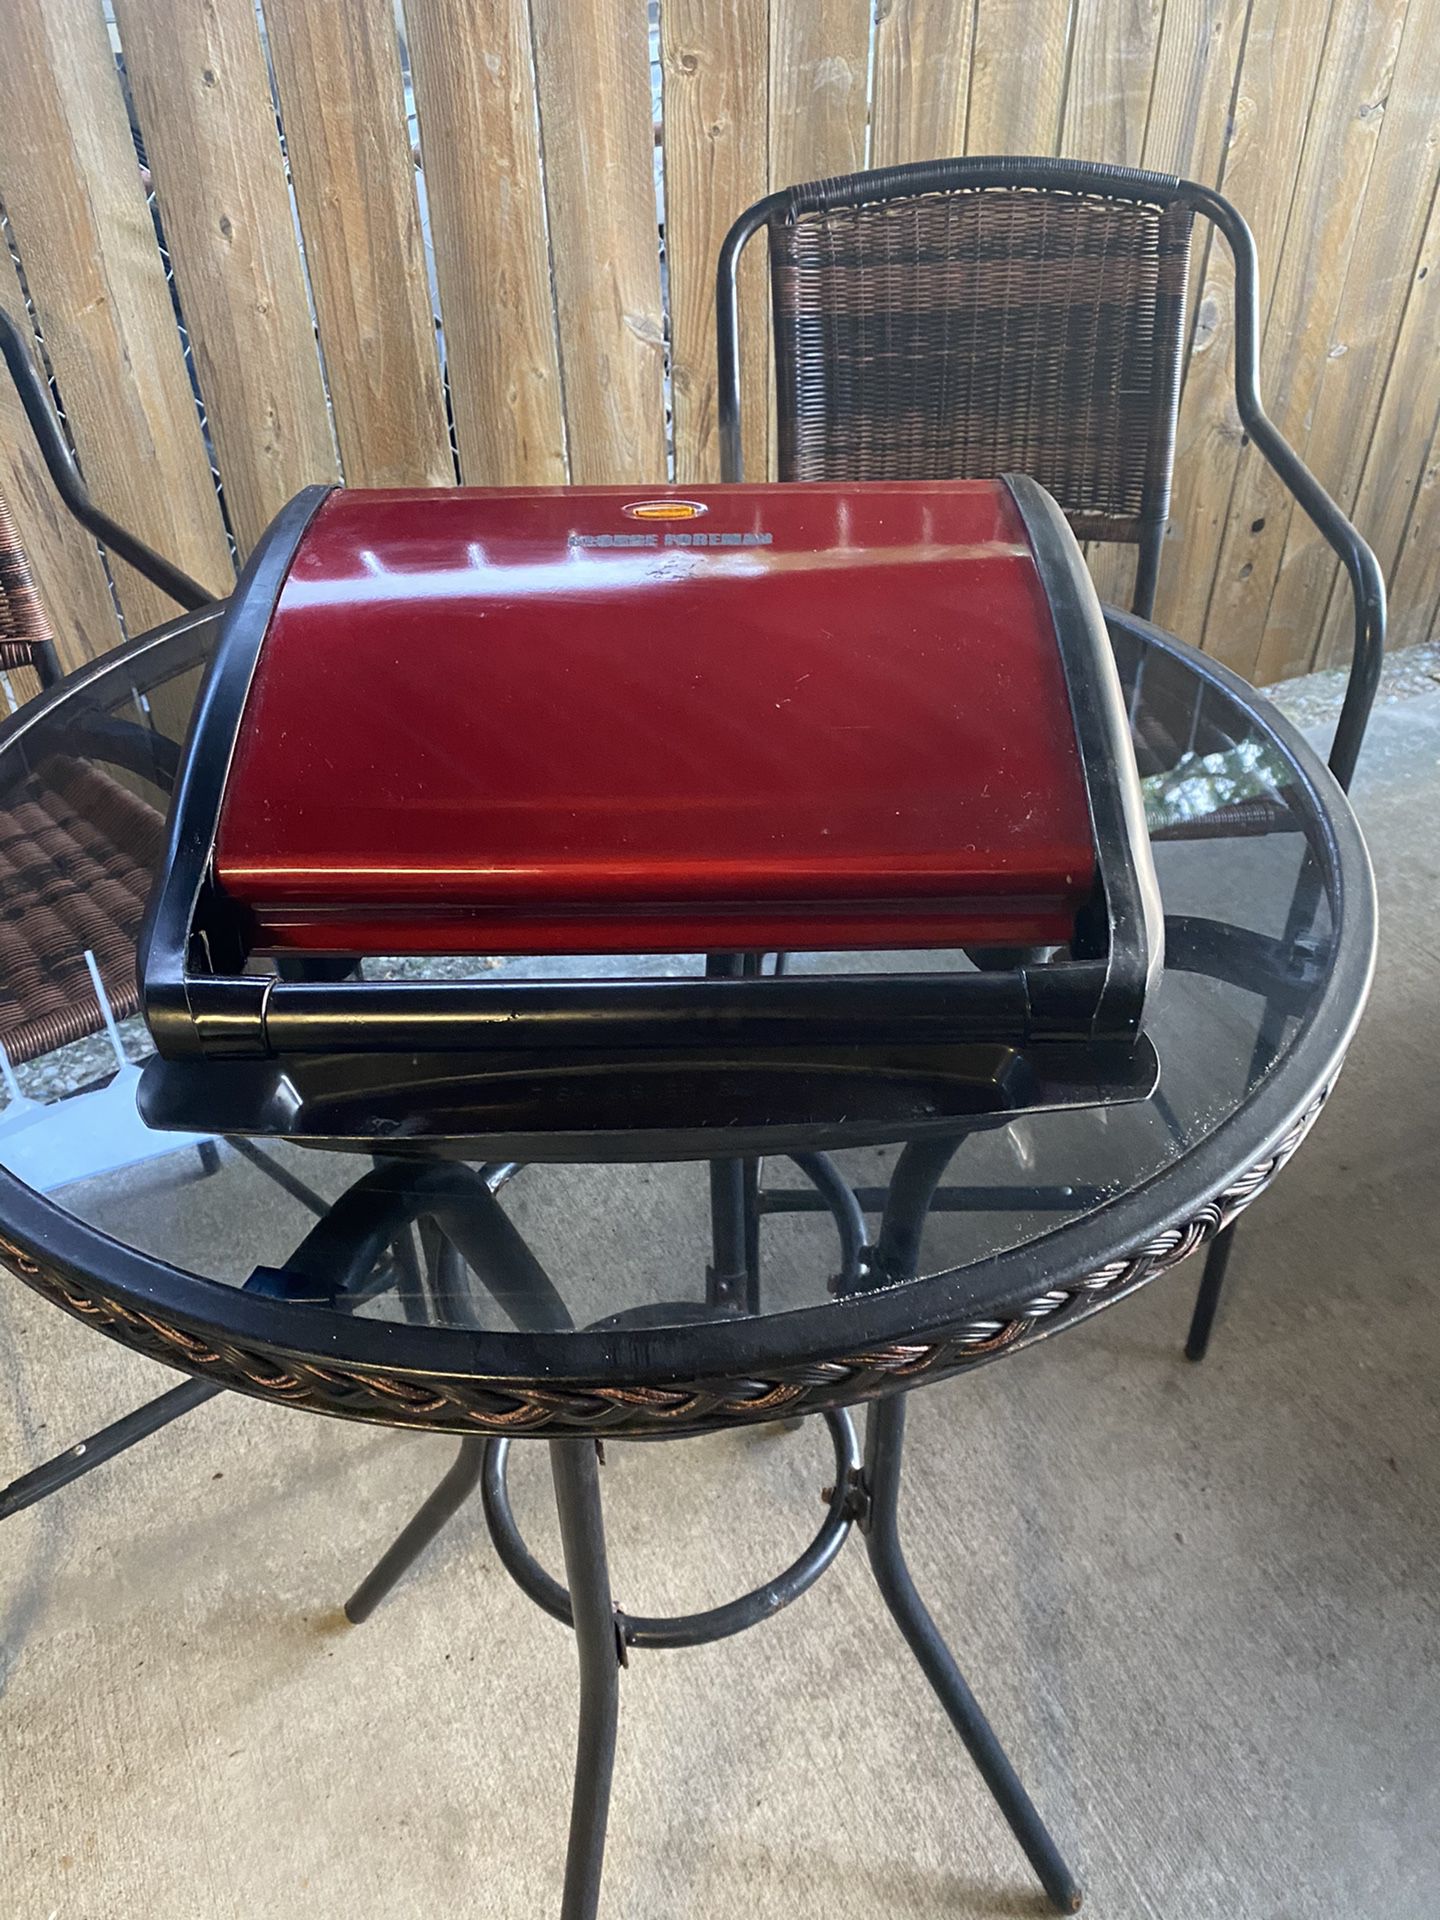 Used- George Foreman - red grill